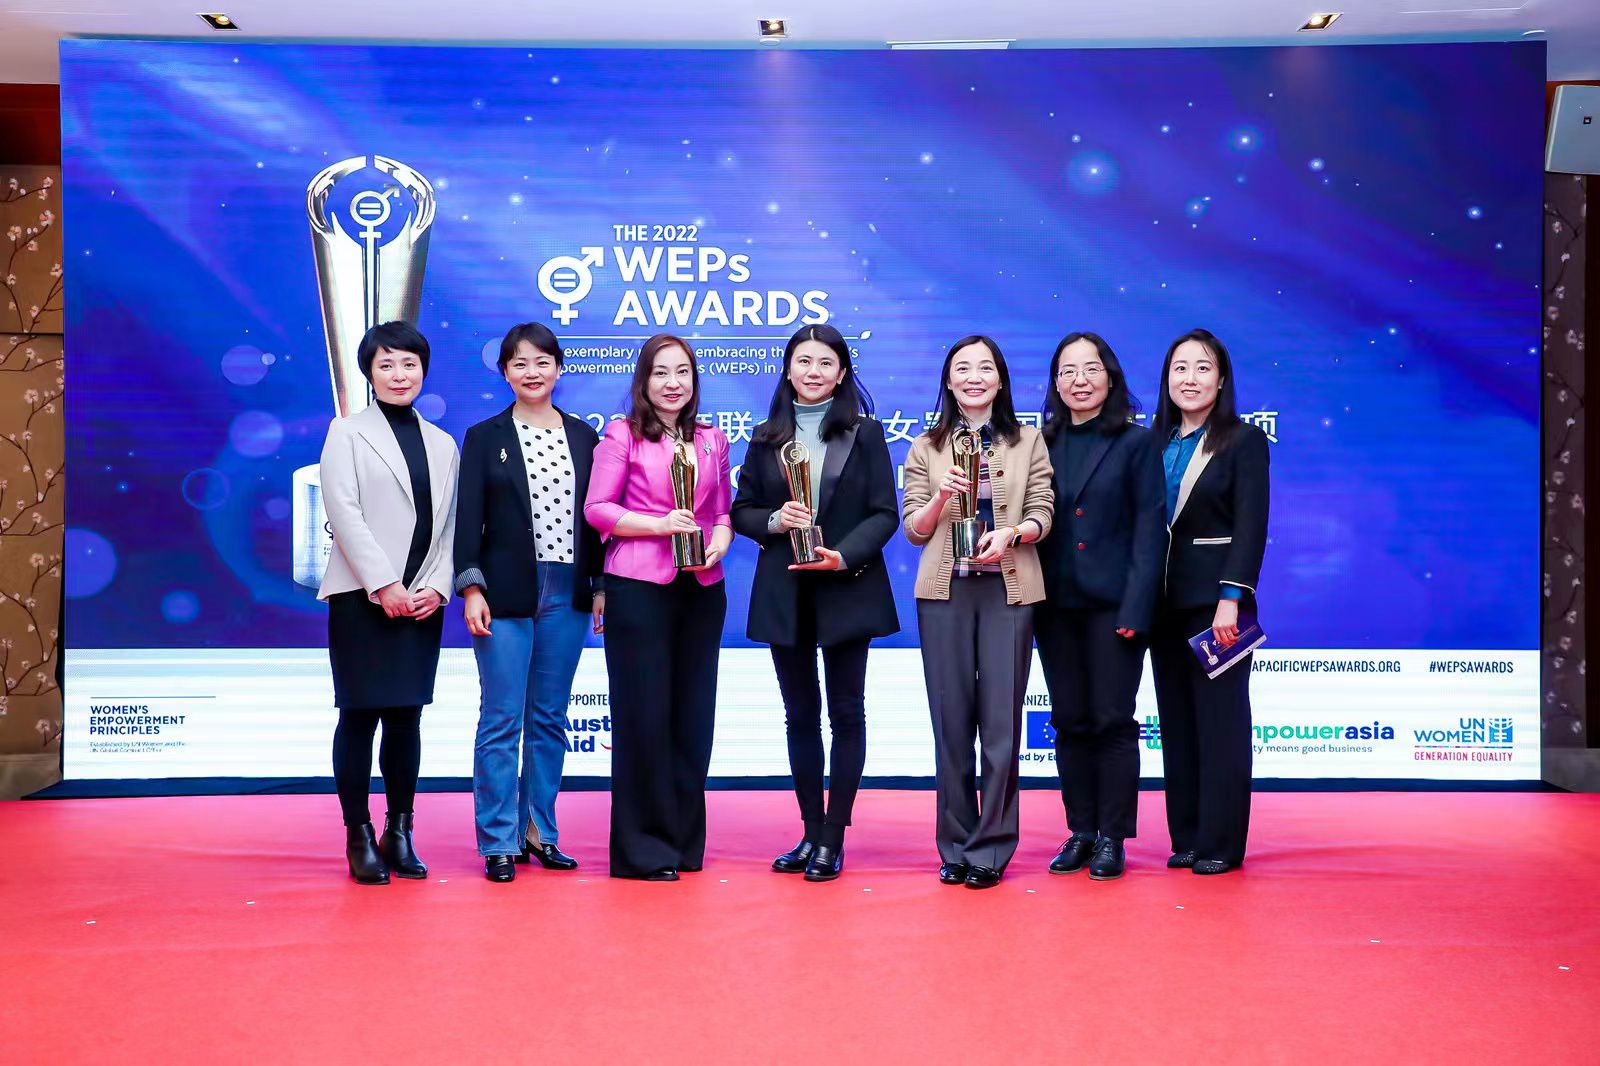 the UN Women’s China WEPs Awards